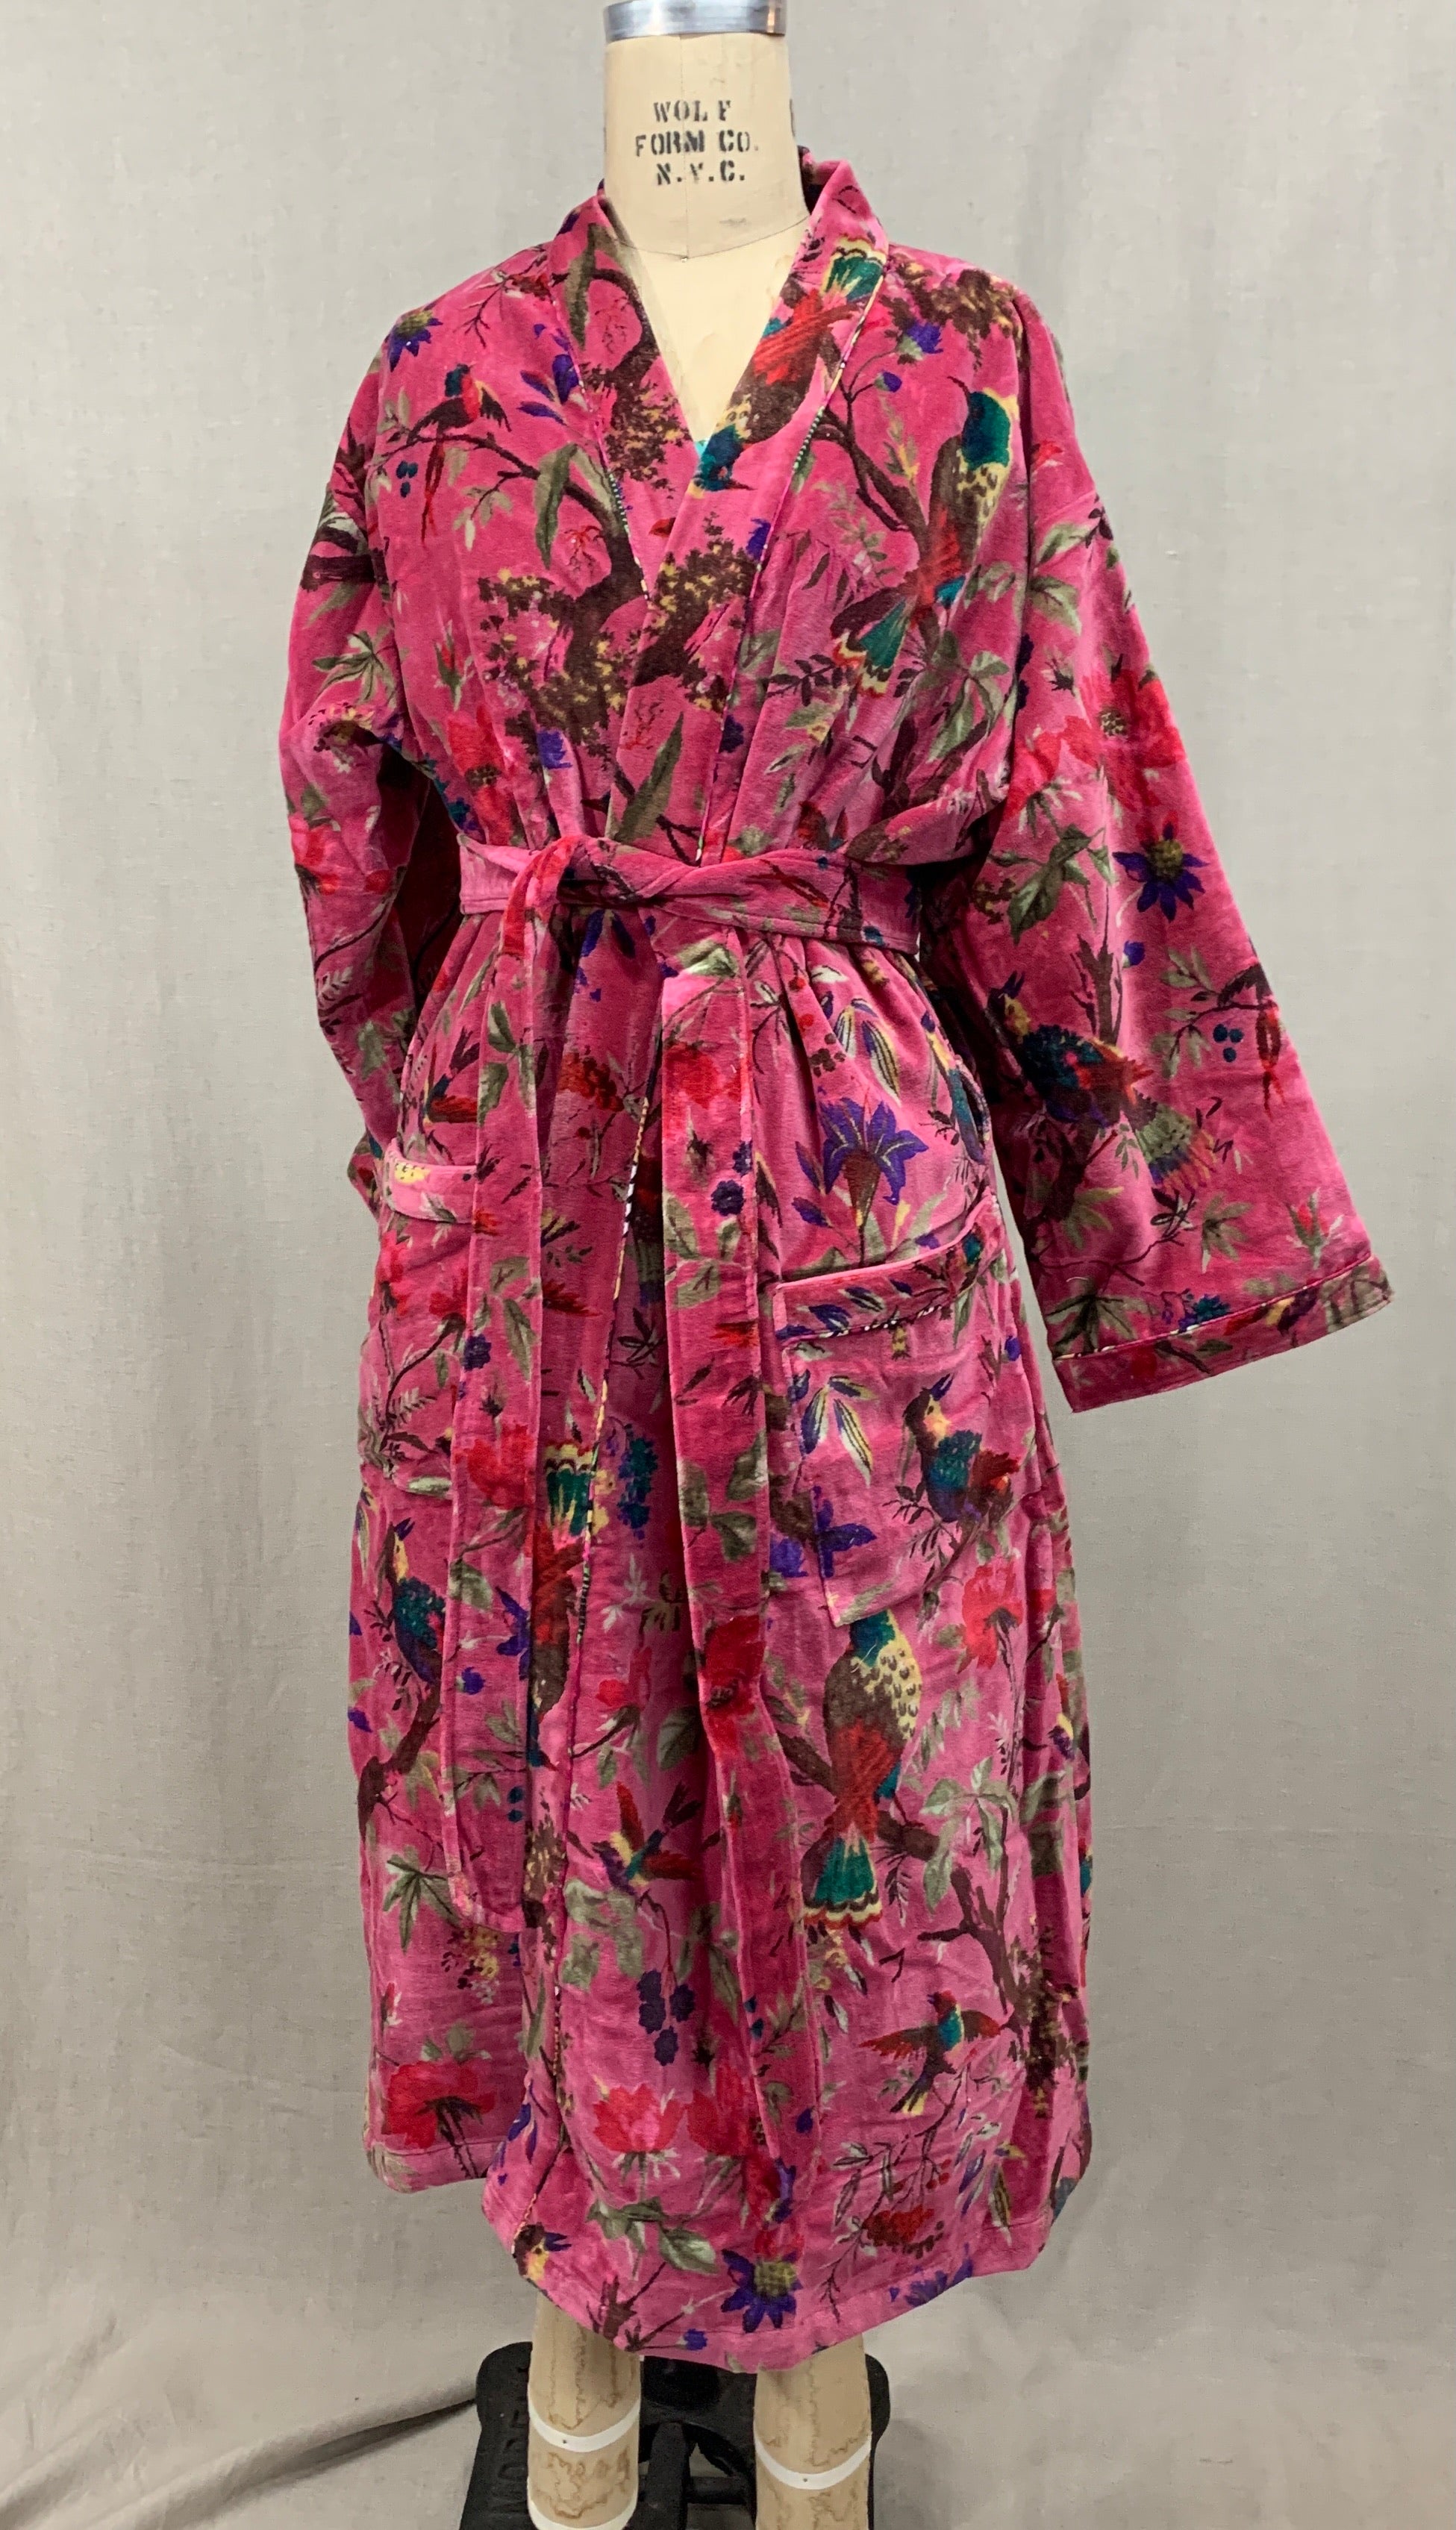 Hot Pink Velvet Robe. It is lined with a very bright colorful cotton fabric. This can be worn as a robe or duster.  It is also reversible. 